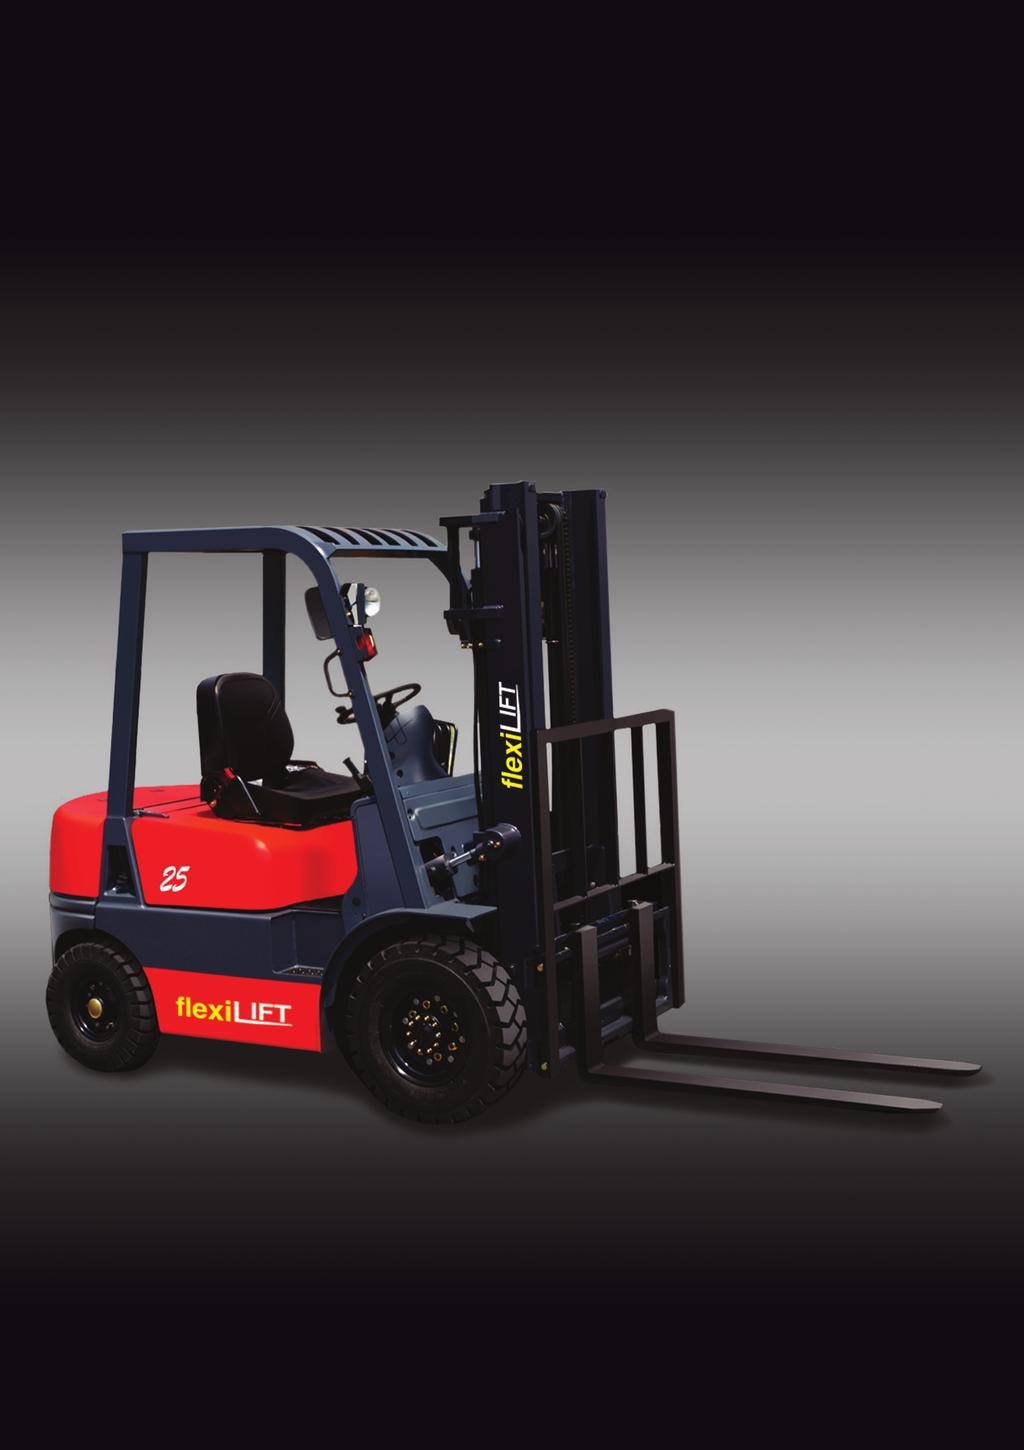 Flexilift s commitment and vision To provide the toughest and most reliable forklift trucks for even the most challenging applications.